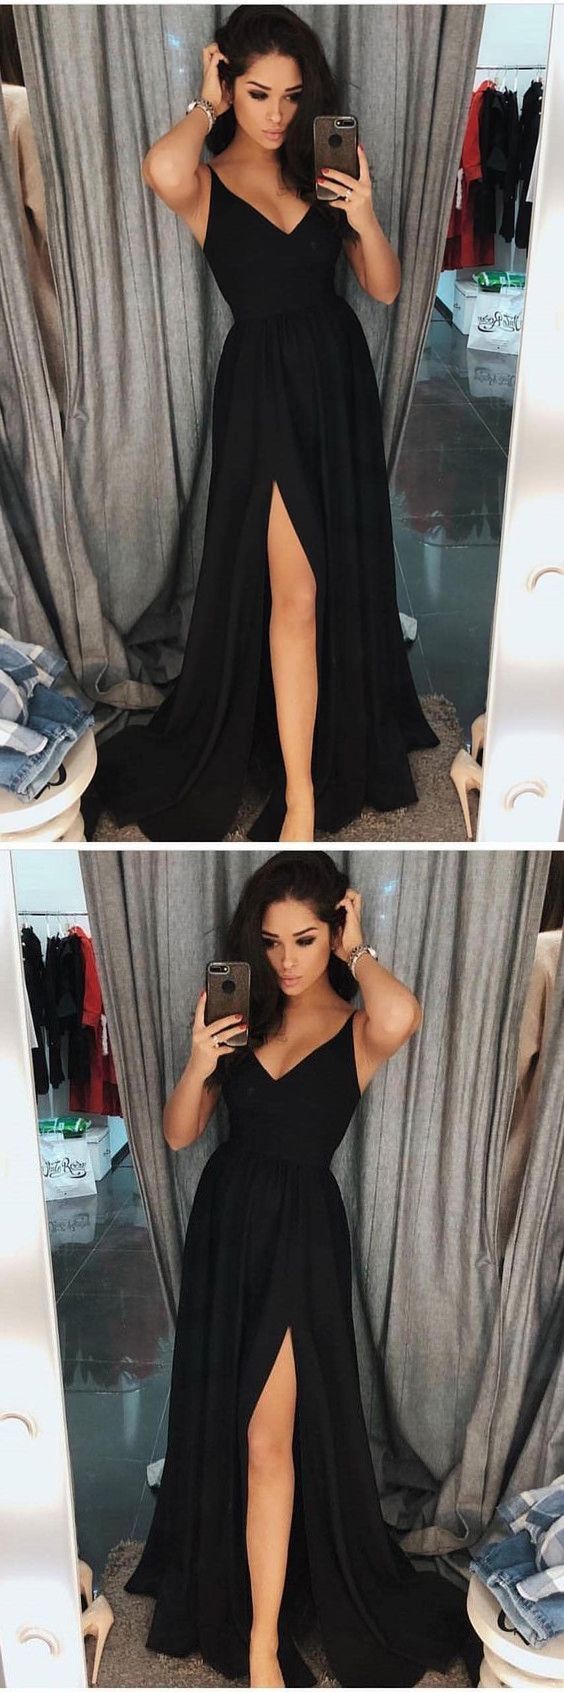 Black Prom Dress with Slit, Prom Dresses, Evening Gown,Graduation School Party Gown, Winter Formal Dress